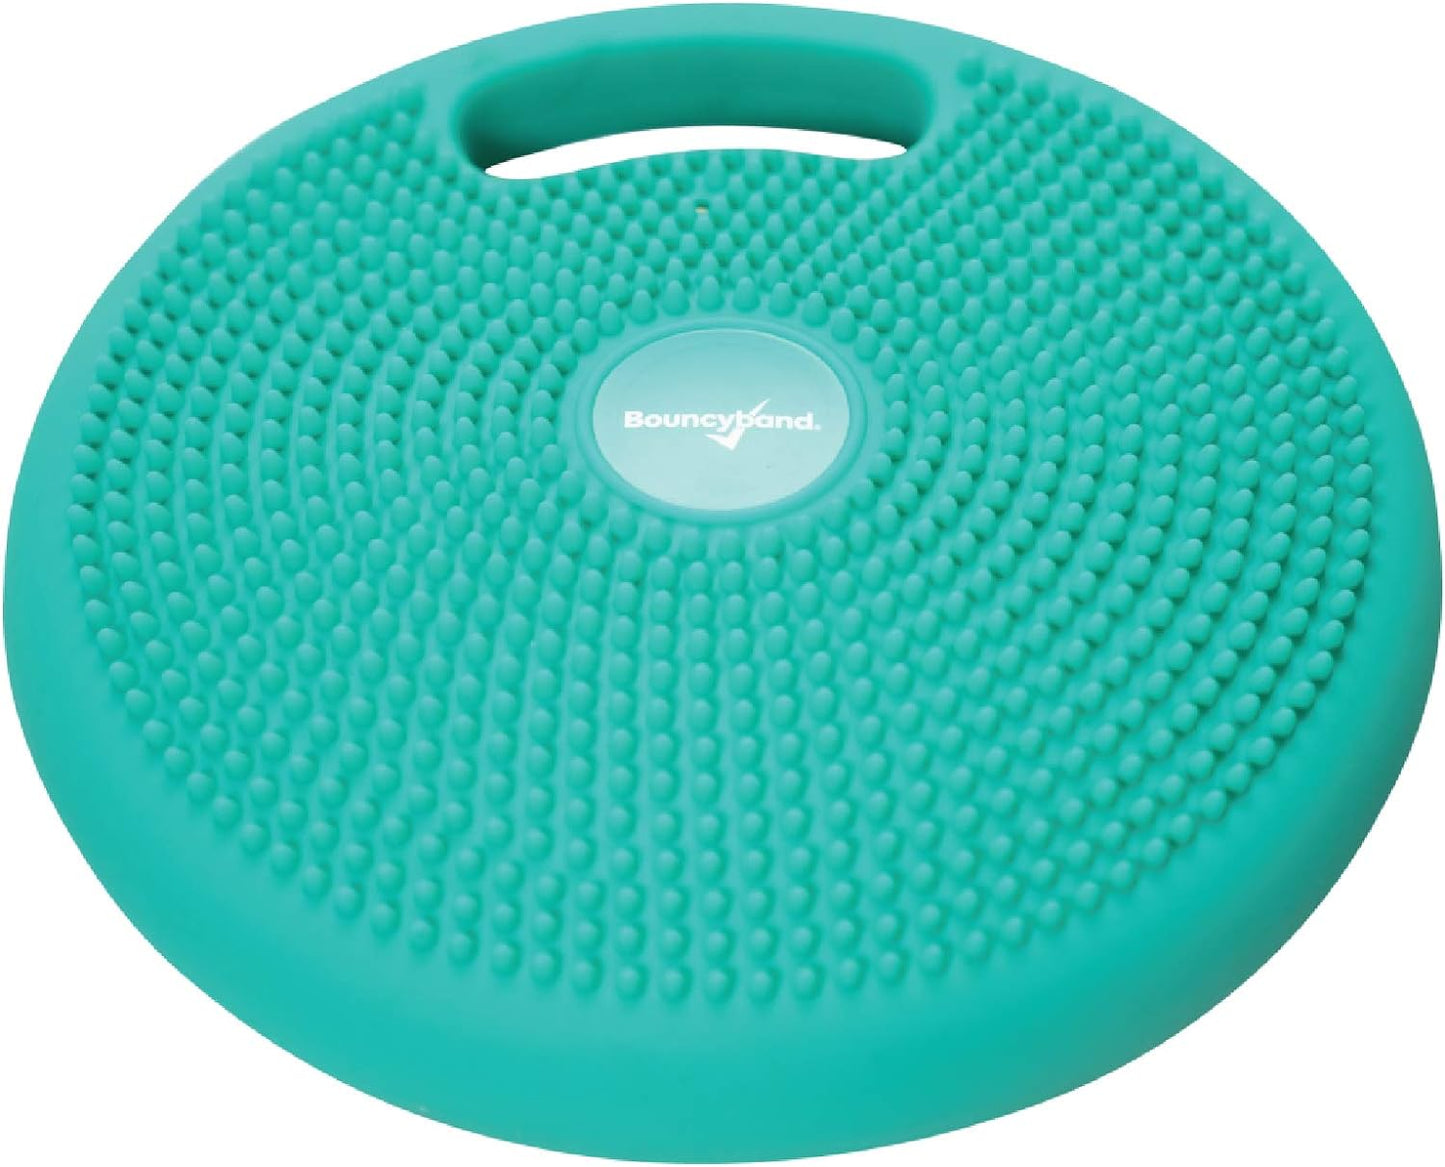 Bouncyband Portable Wiggle Seat Sensory Cushion Improves Kids’ Focus in School & Home (Green)